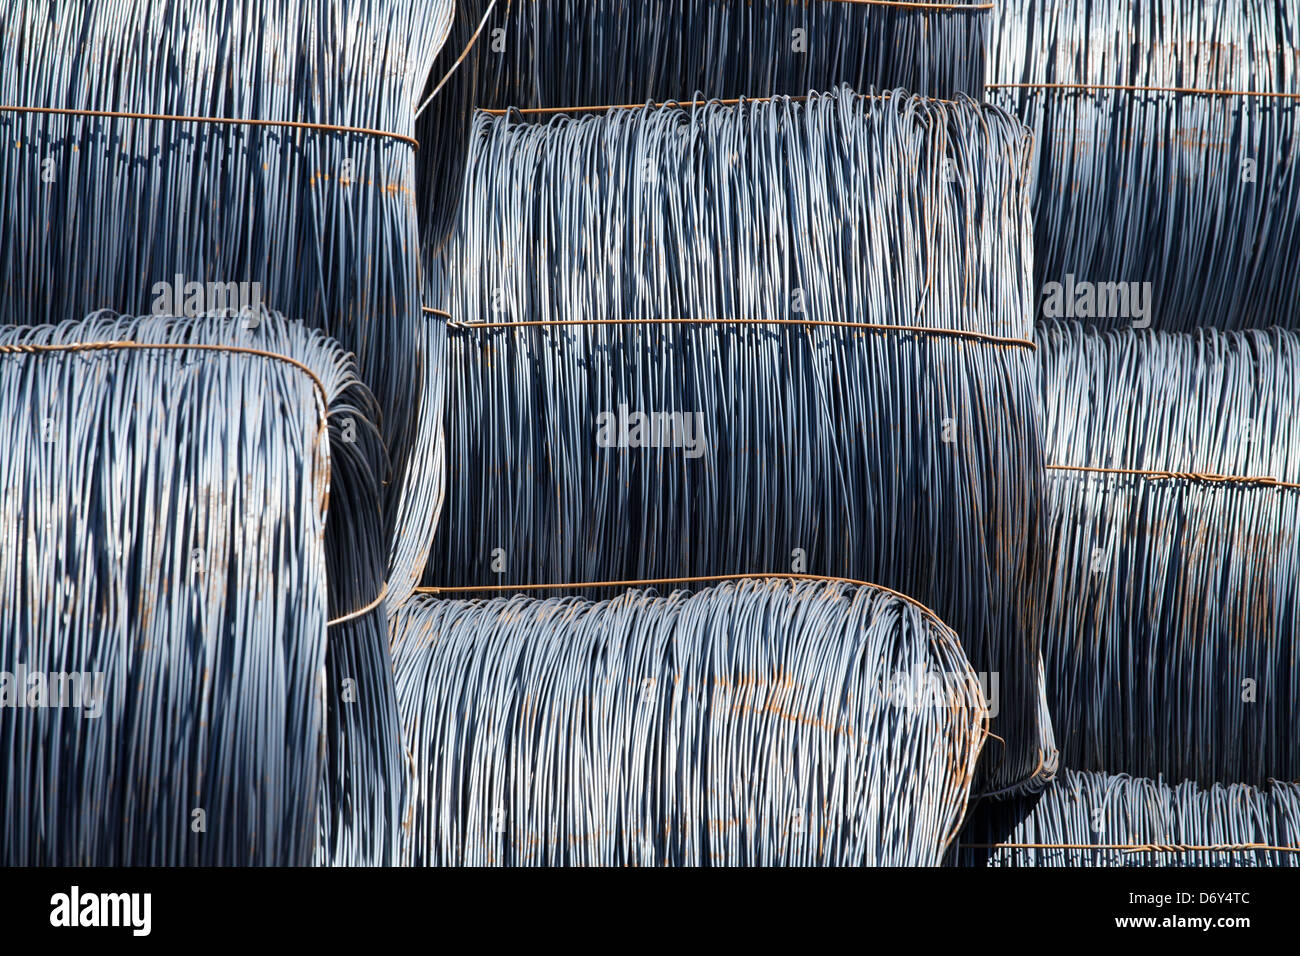 coils metal wire stack closeup Stock Photo